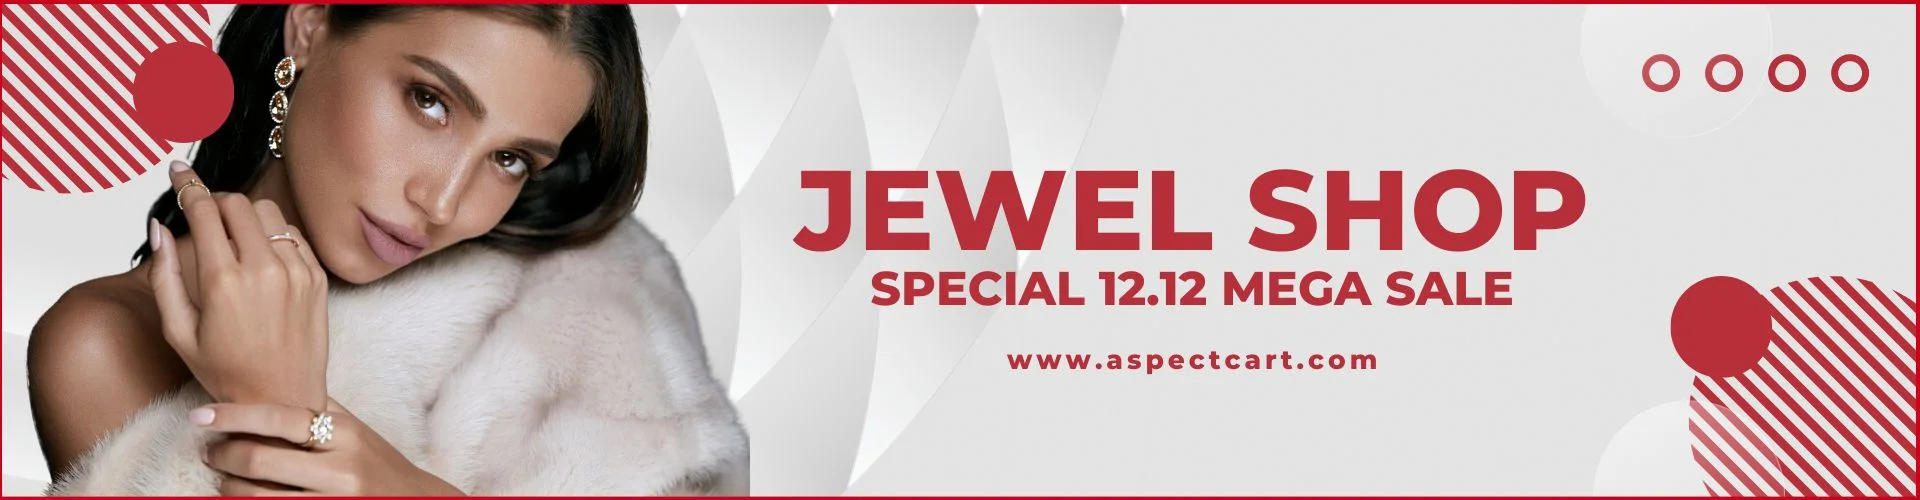 Banner advertising jewelry collection at a Jewel E-shop